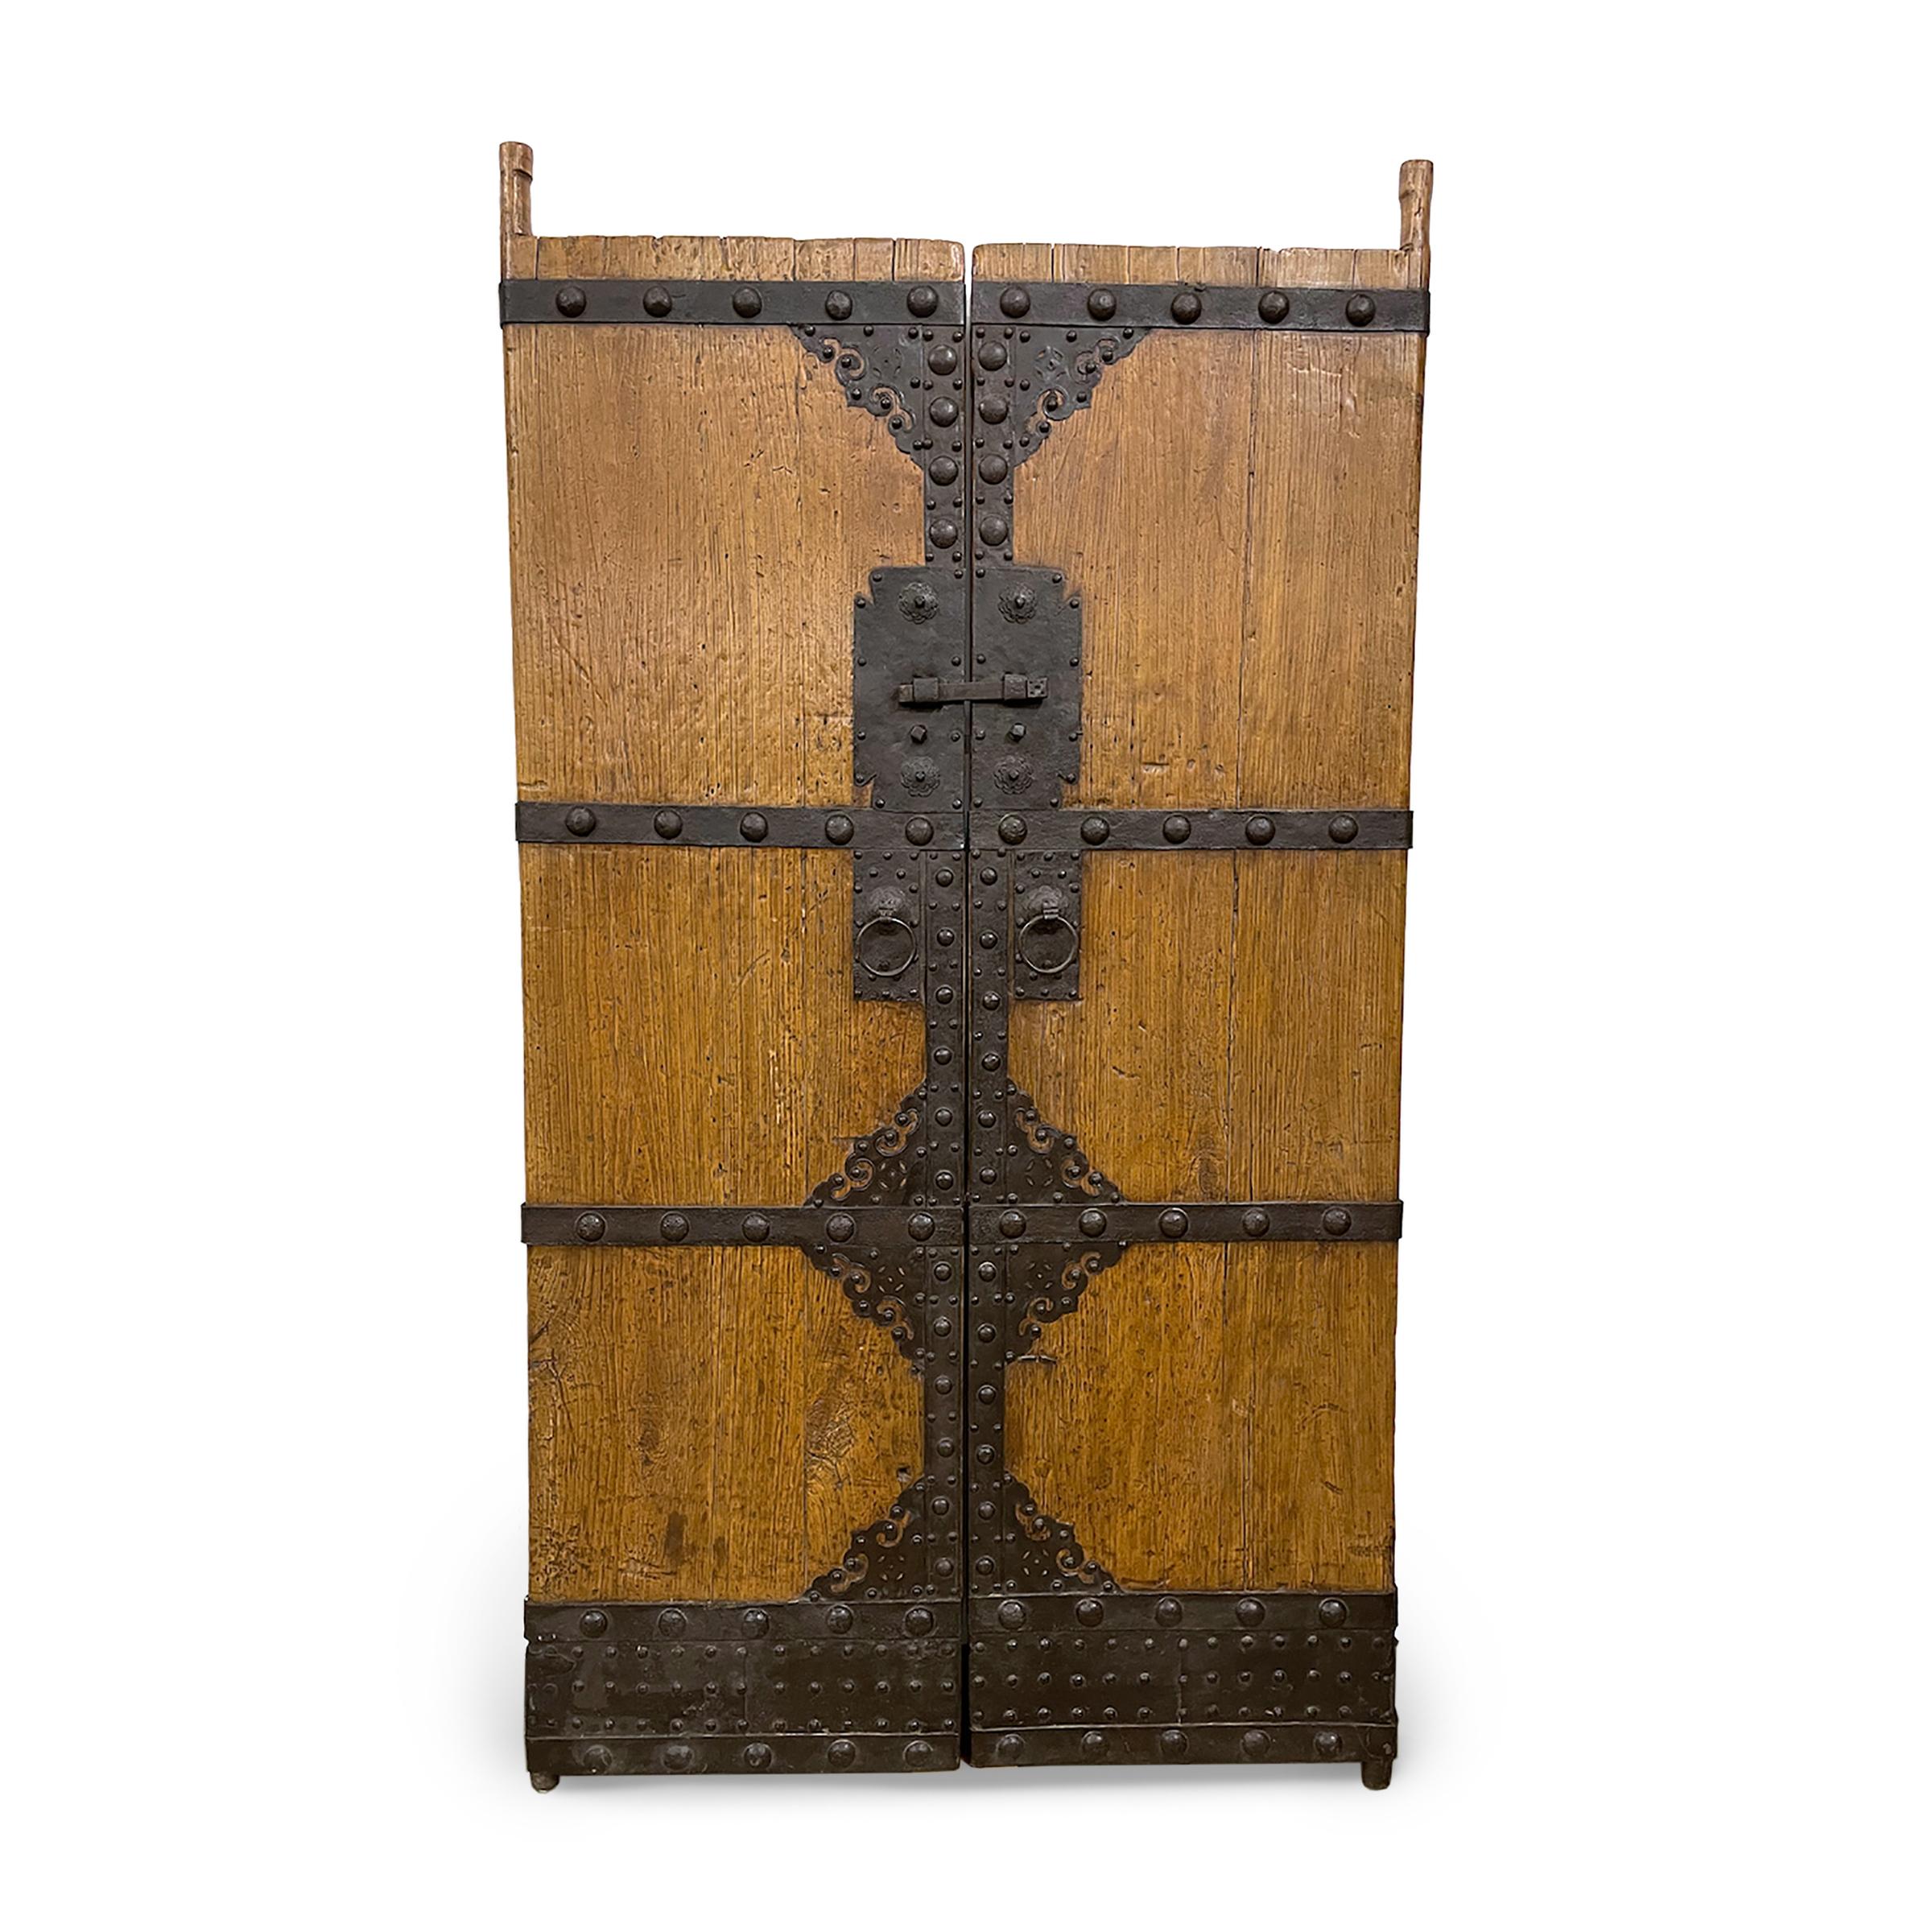 This monumental pair of doors dates to the mid-19th century and once enclosed the inner courtyard of a grandQing-dynasty home in northern China. The courtyard doors are crafted of northern elm (yumu) and are complete with the original door frame